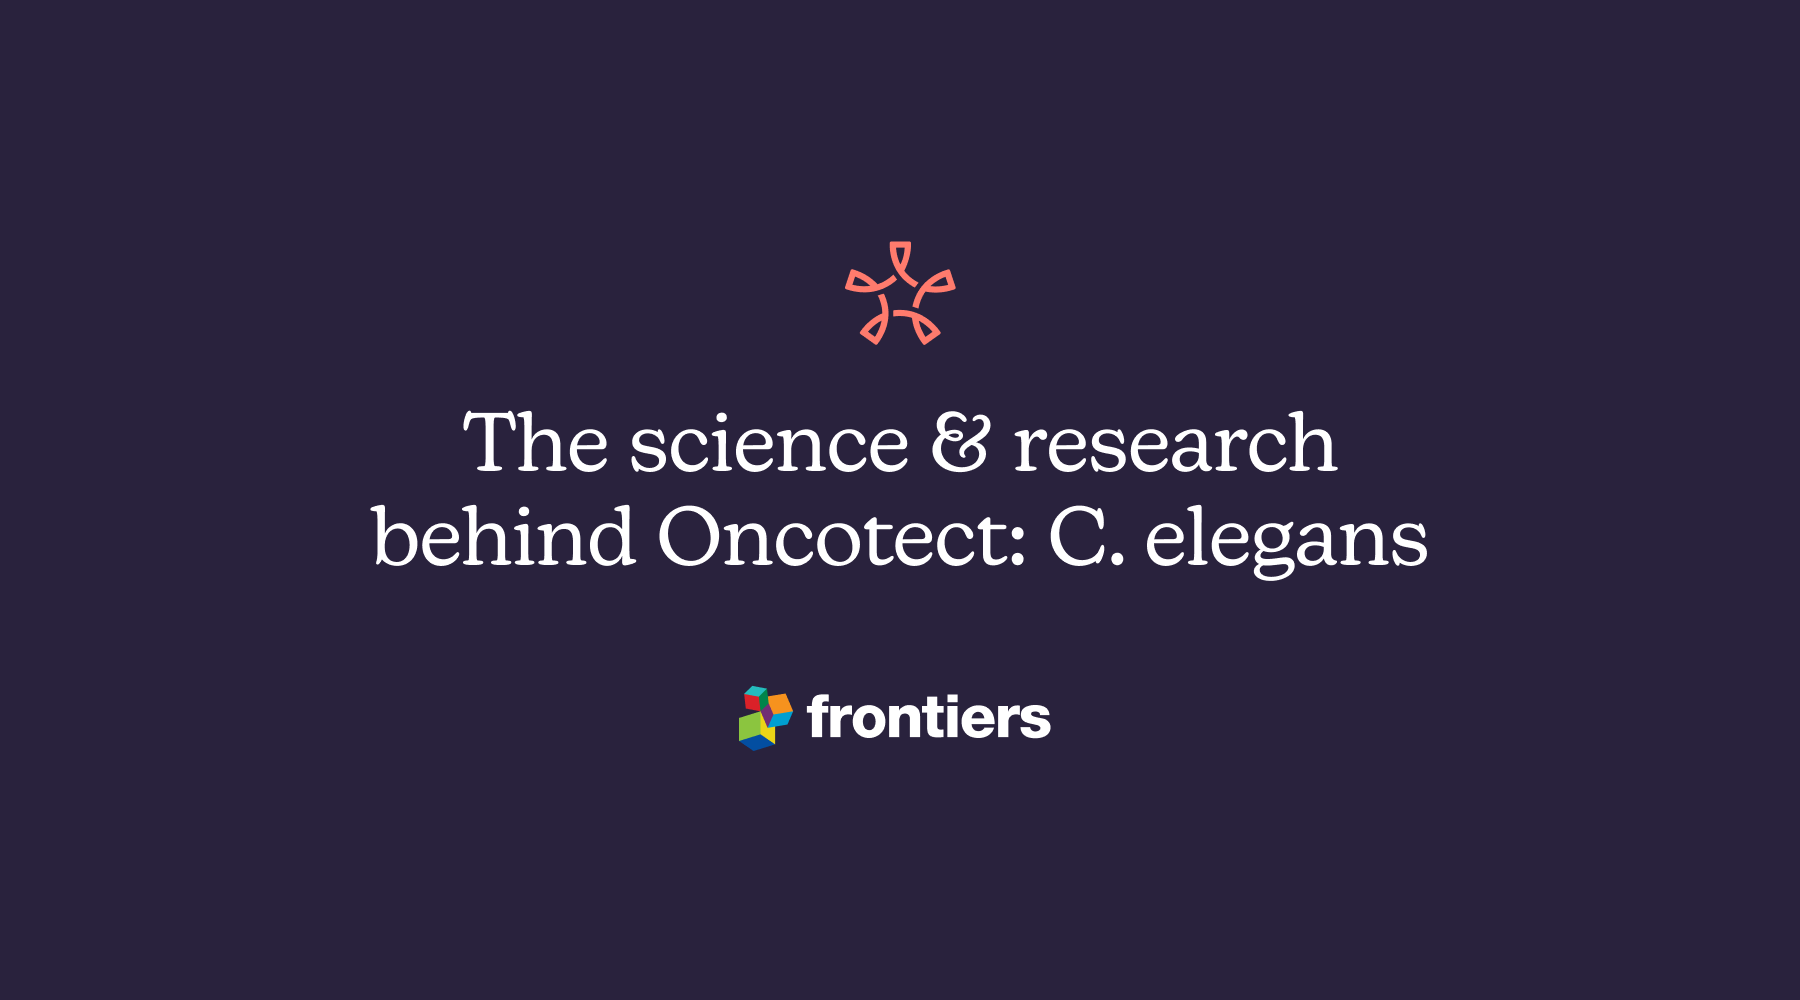 The Science & Research Behind Oncotect